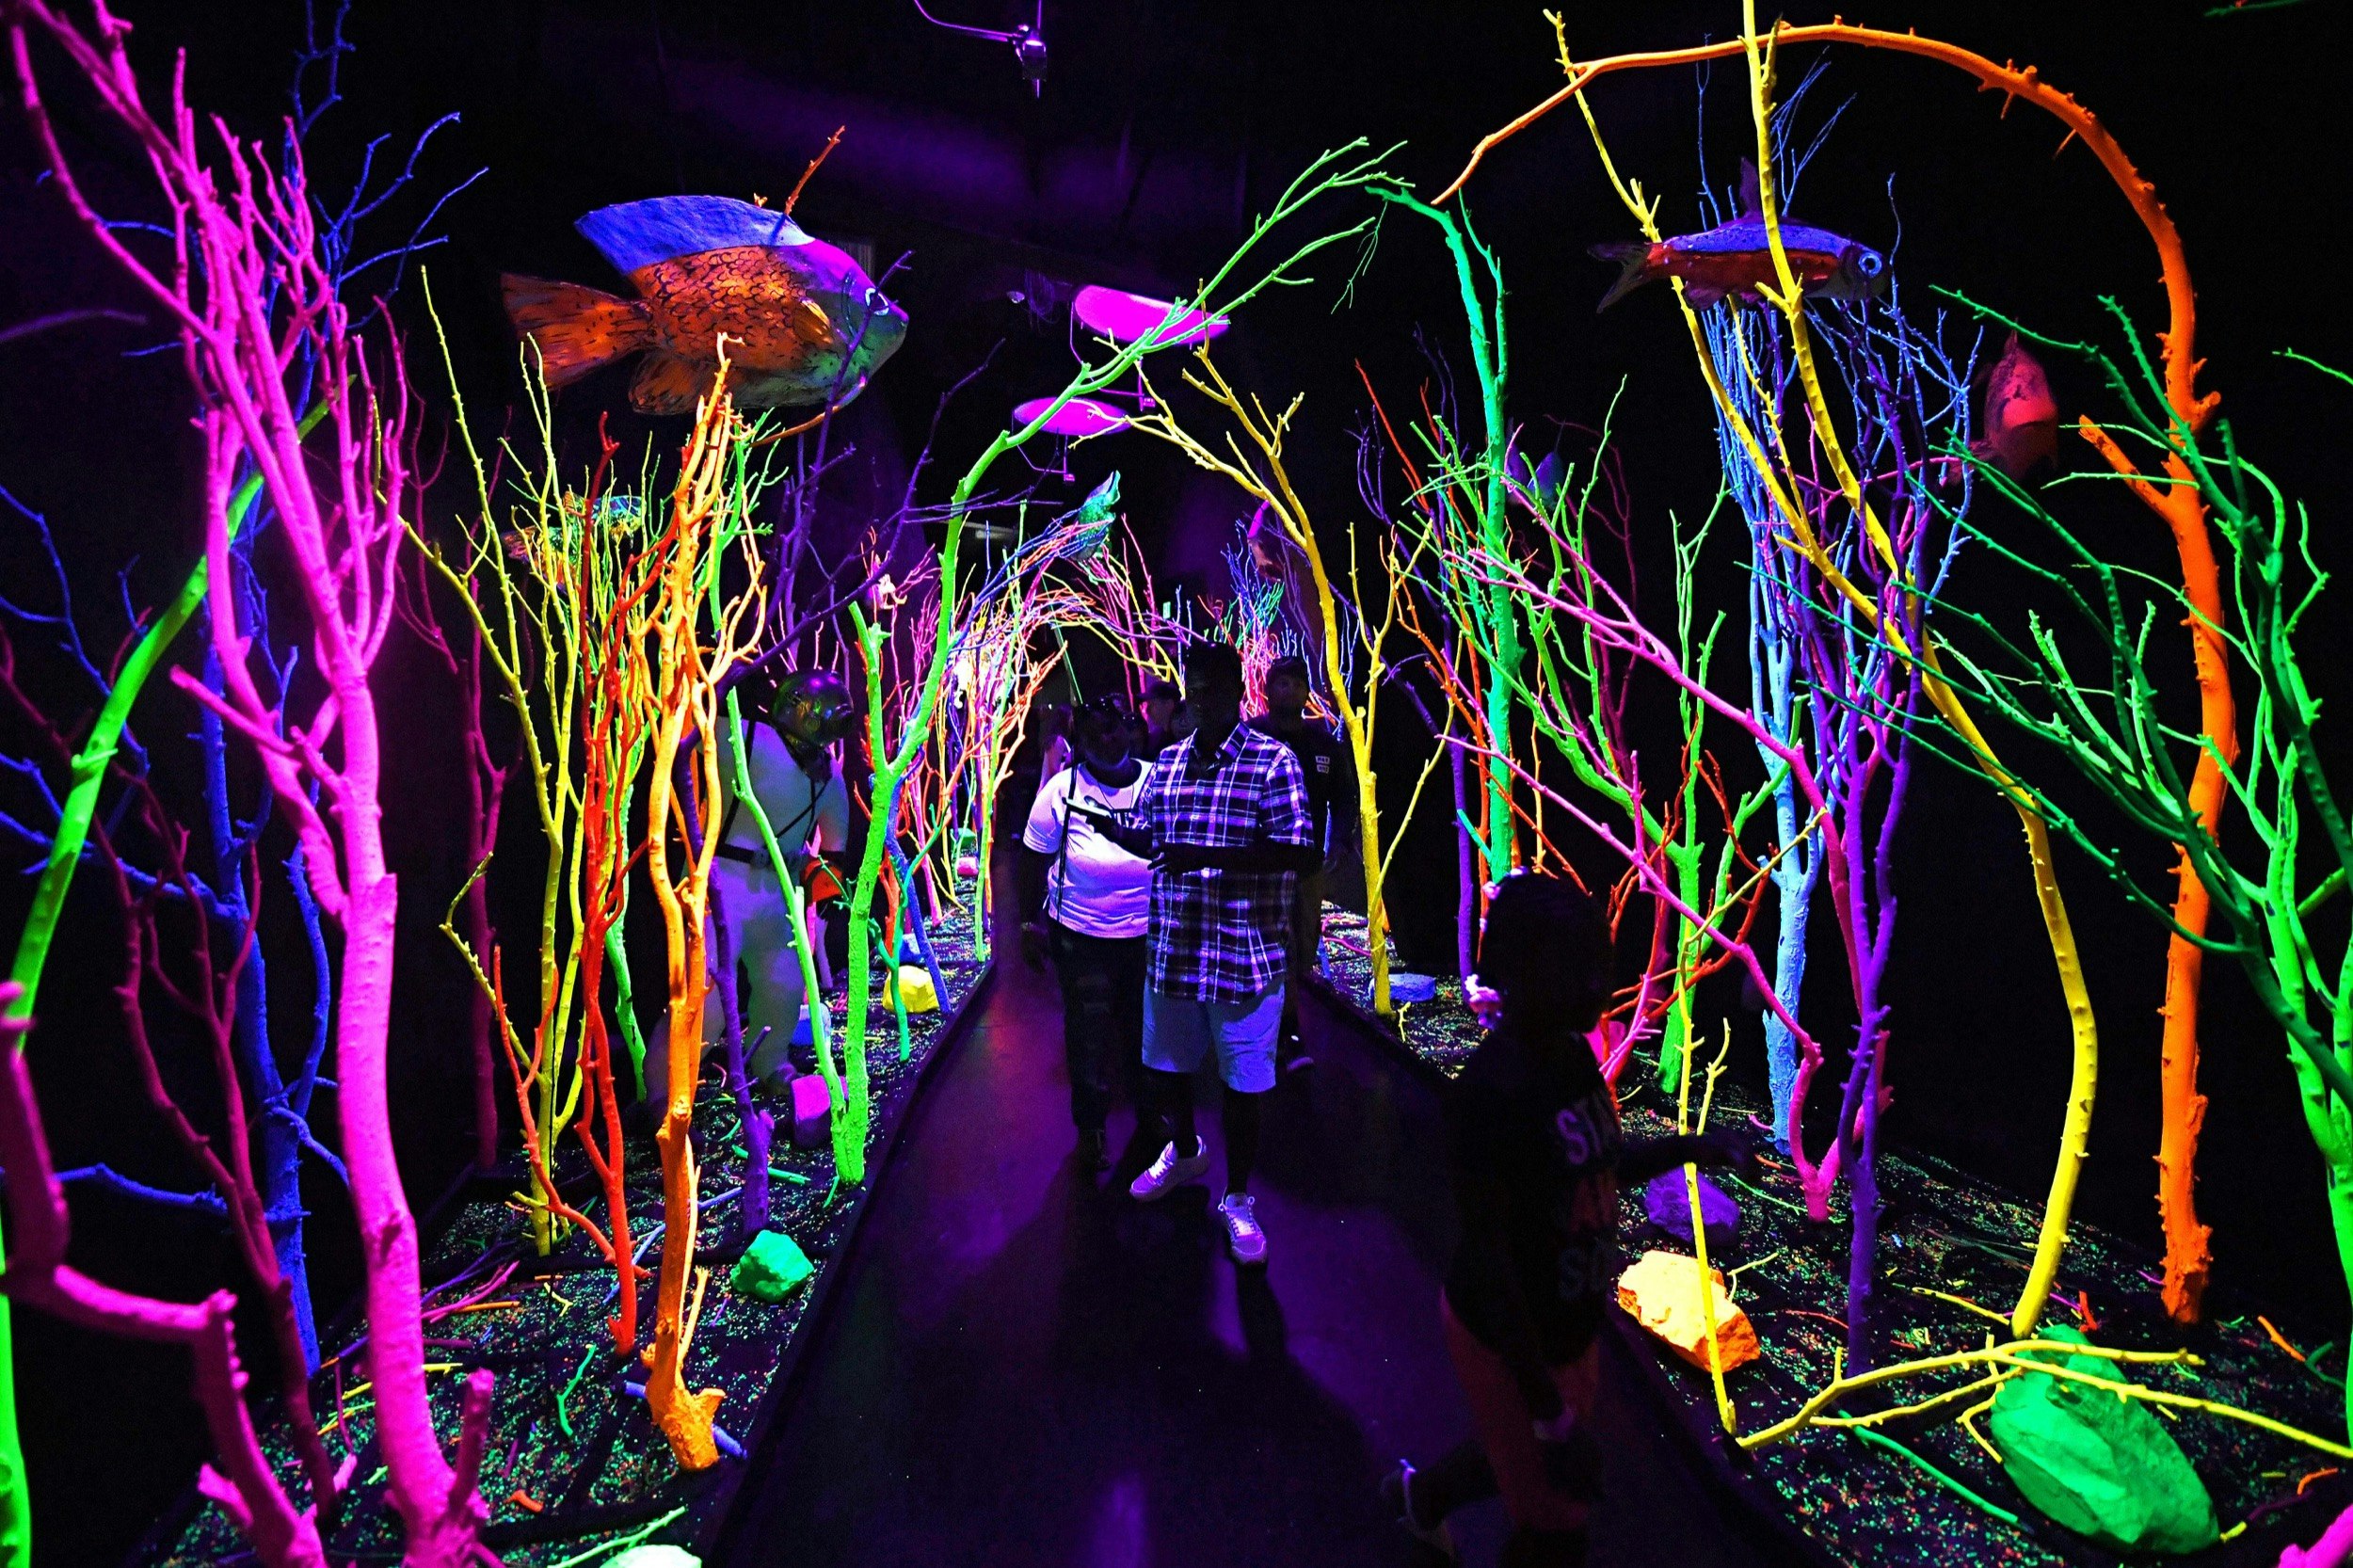 The Meow Wolf tourist attraction which has been described as an "immersive, multimedia experiences" at its location in an old bowling alley in Santa Fe, New Mexico 